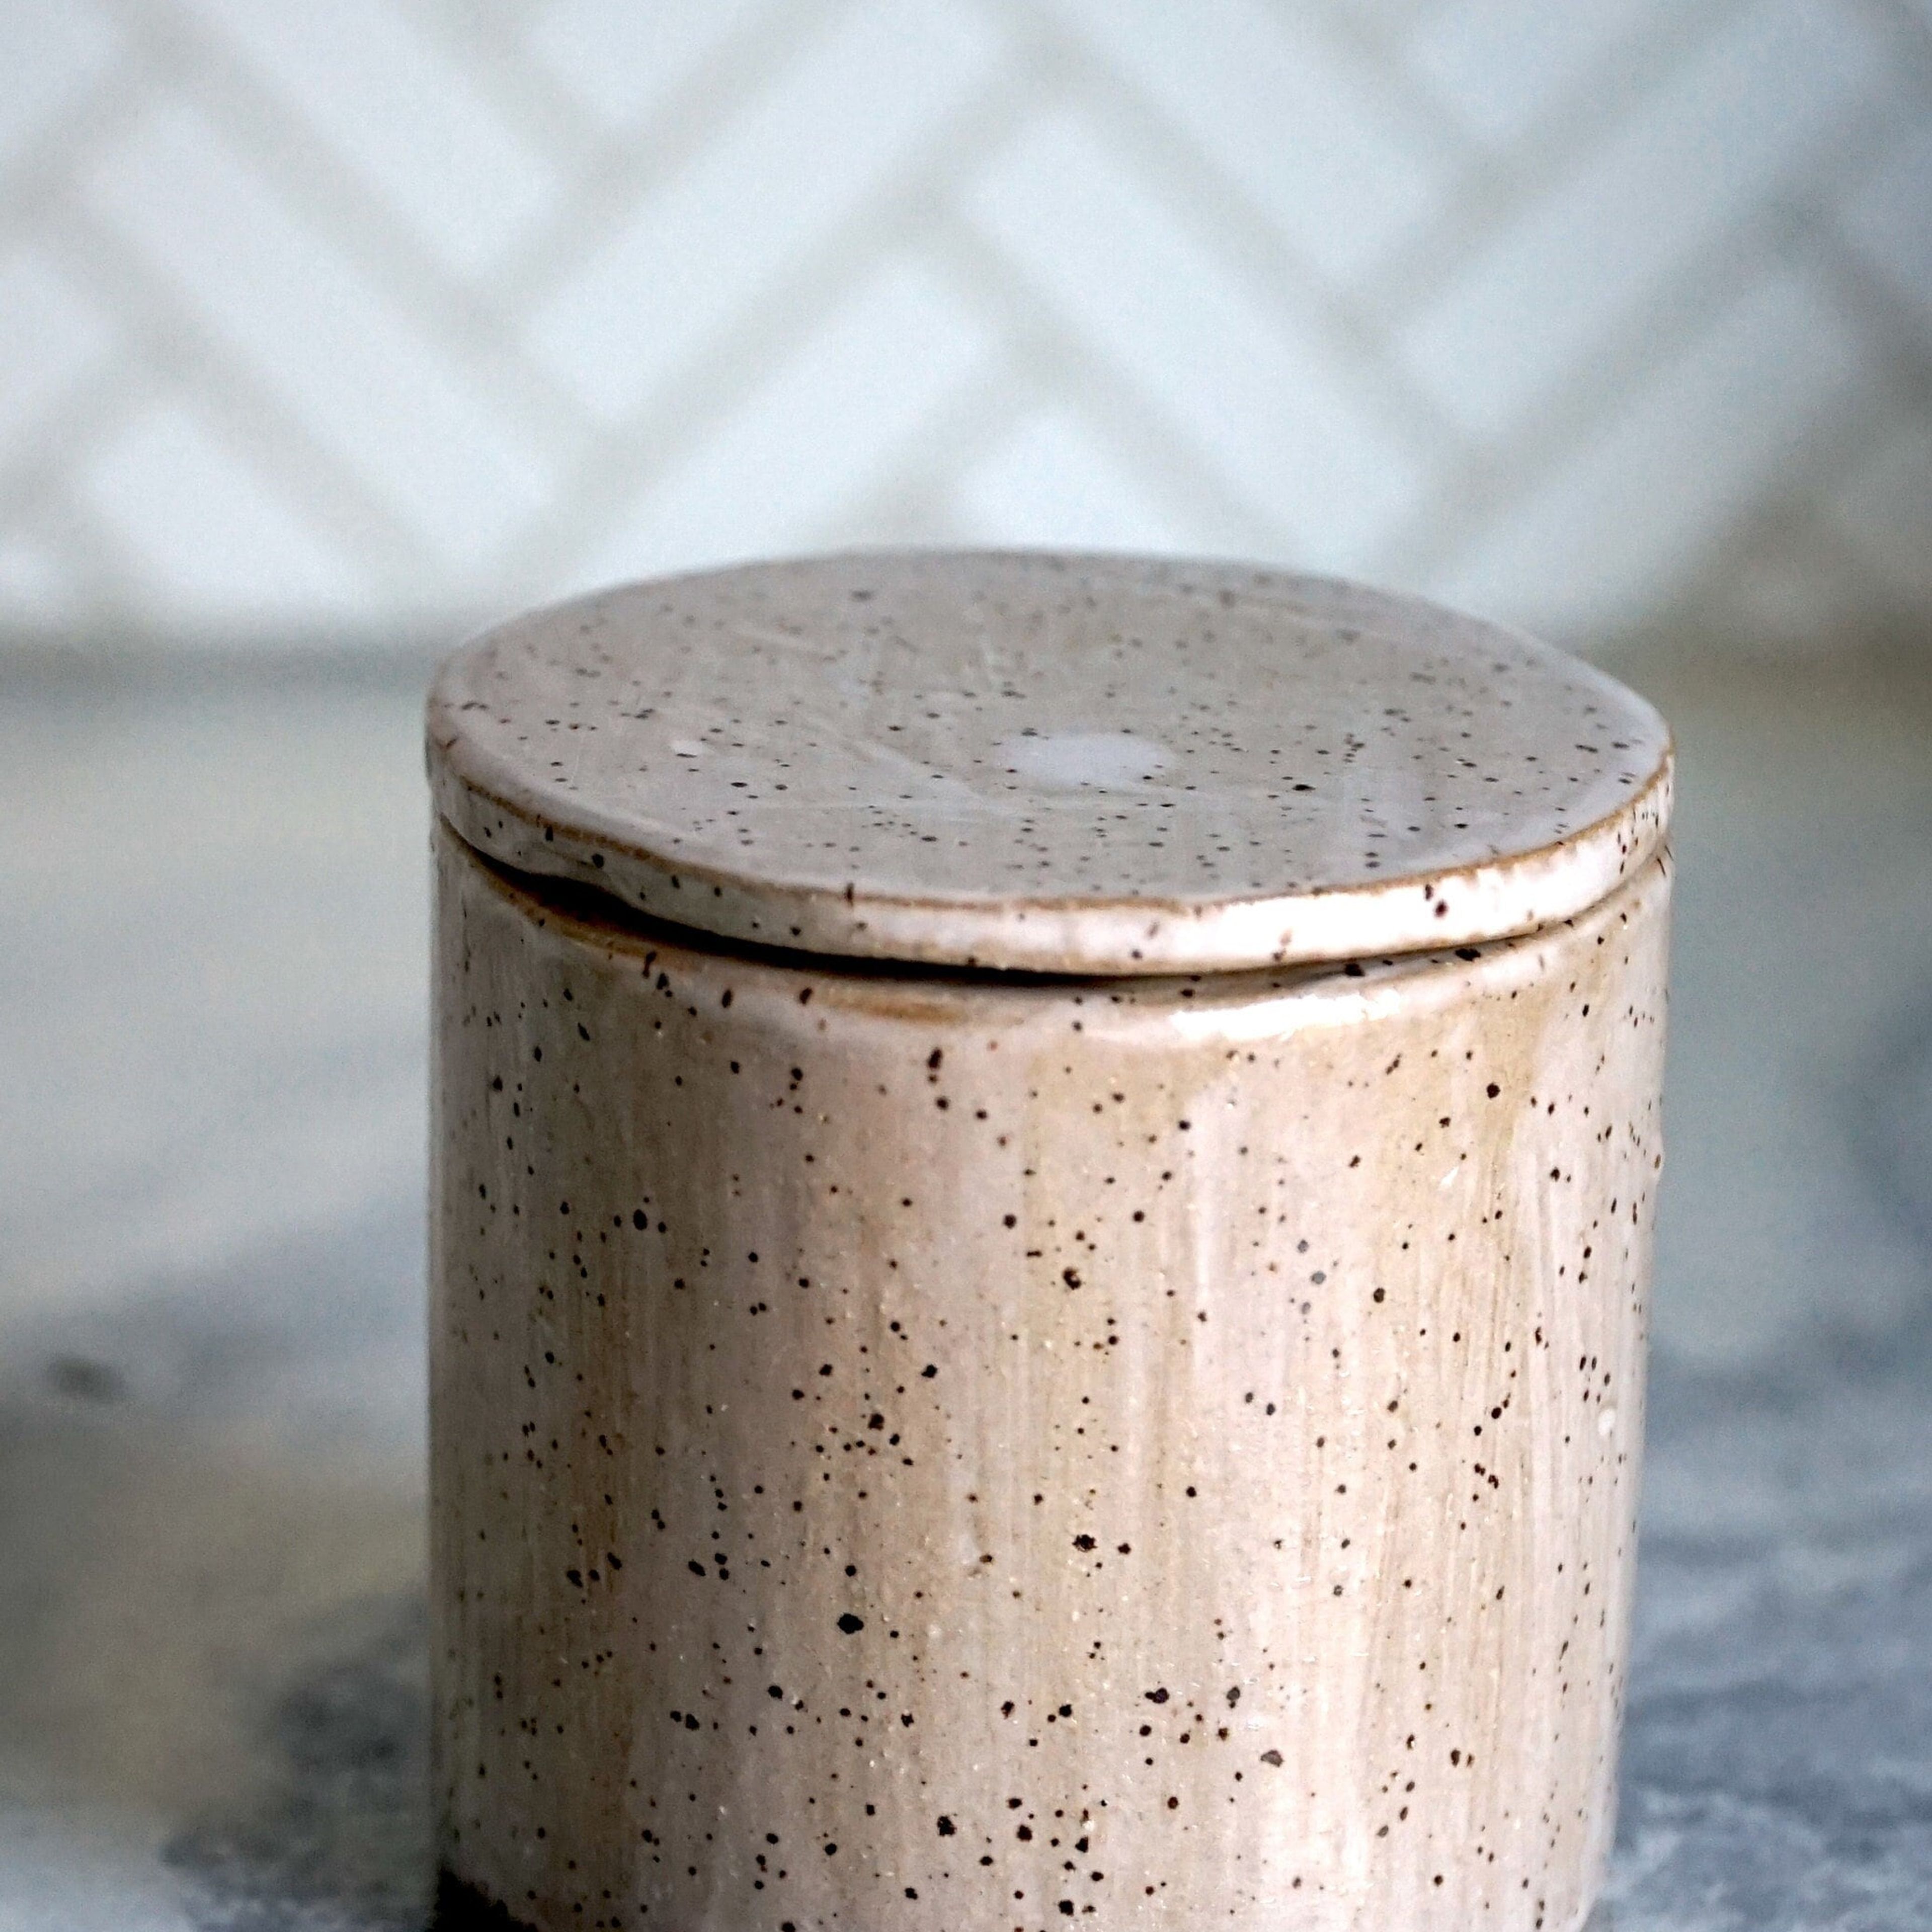 Stoneware Butter Crock - Speckled Clay and White Glazed French Butter Crock - Butter Dish - French Butter Dish - Lidded Butter Box